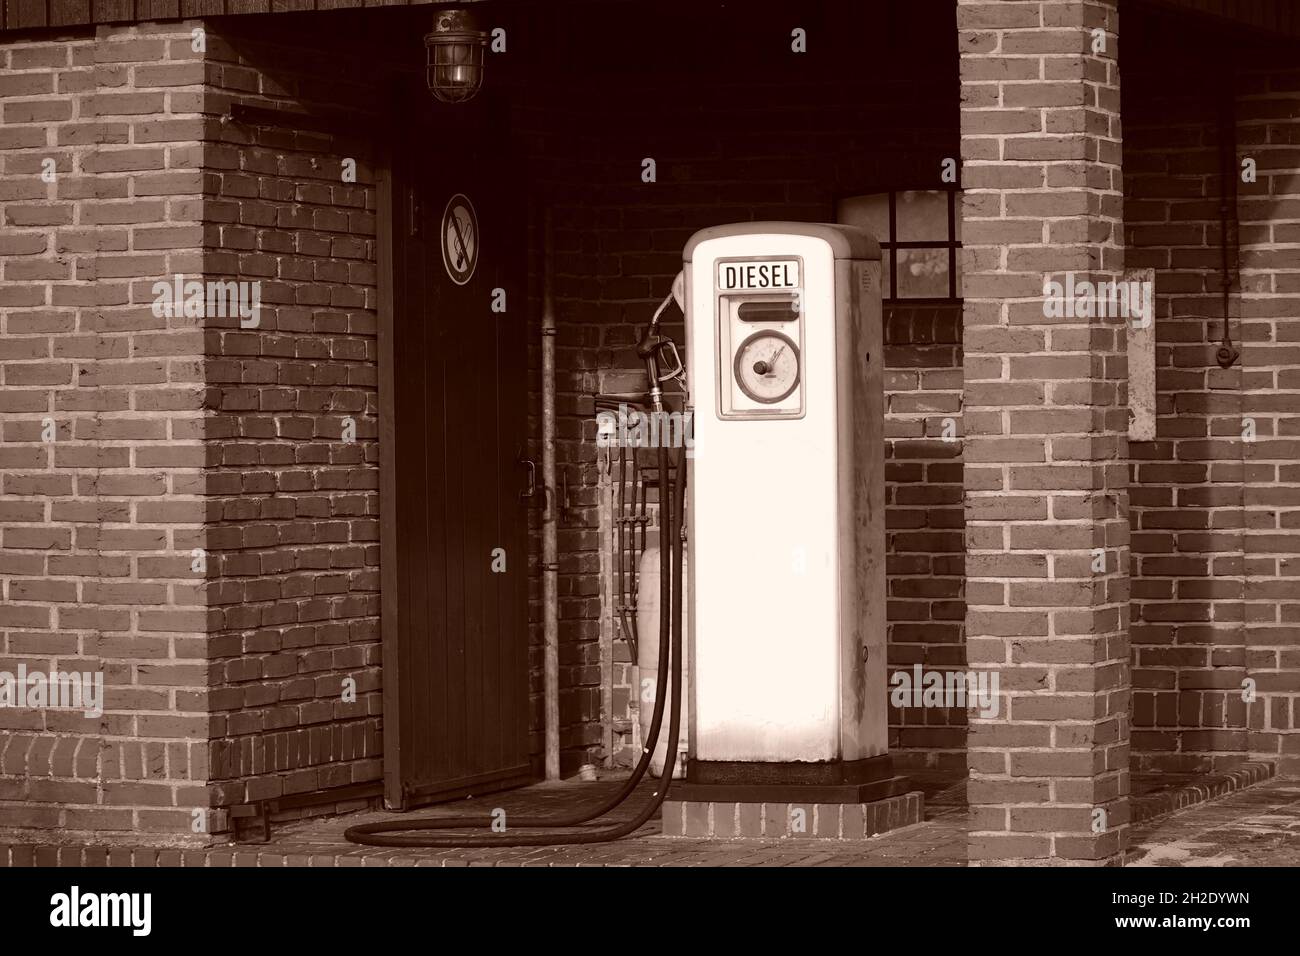 Old gasoline or diesel fuel pump at a gas station in a brick building, Bruchhausen Vilsen, Diepholz district, Lower Saxony, Germany. Stock Photo